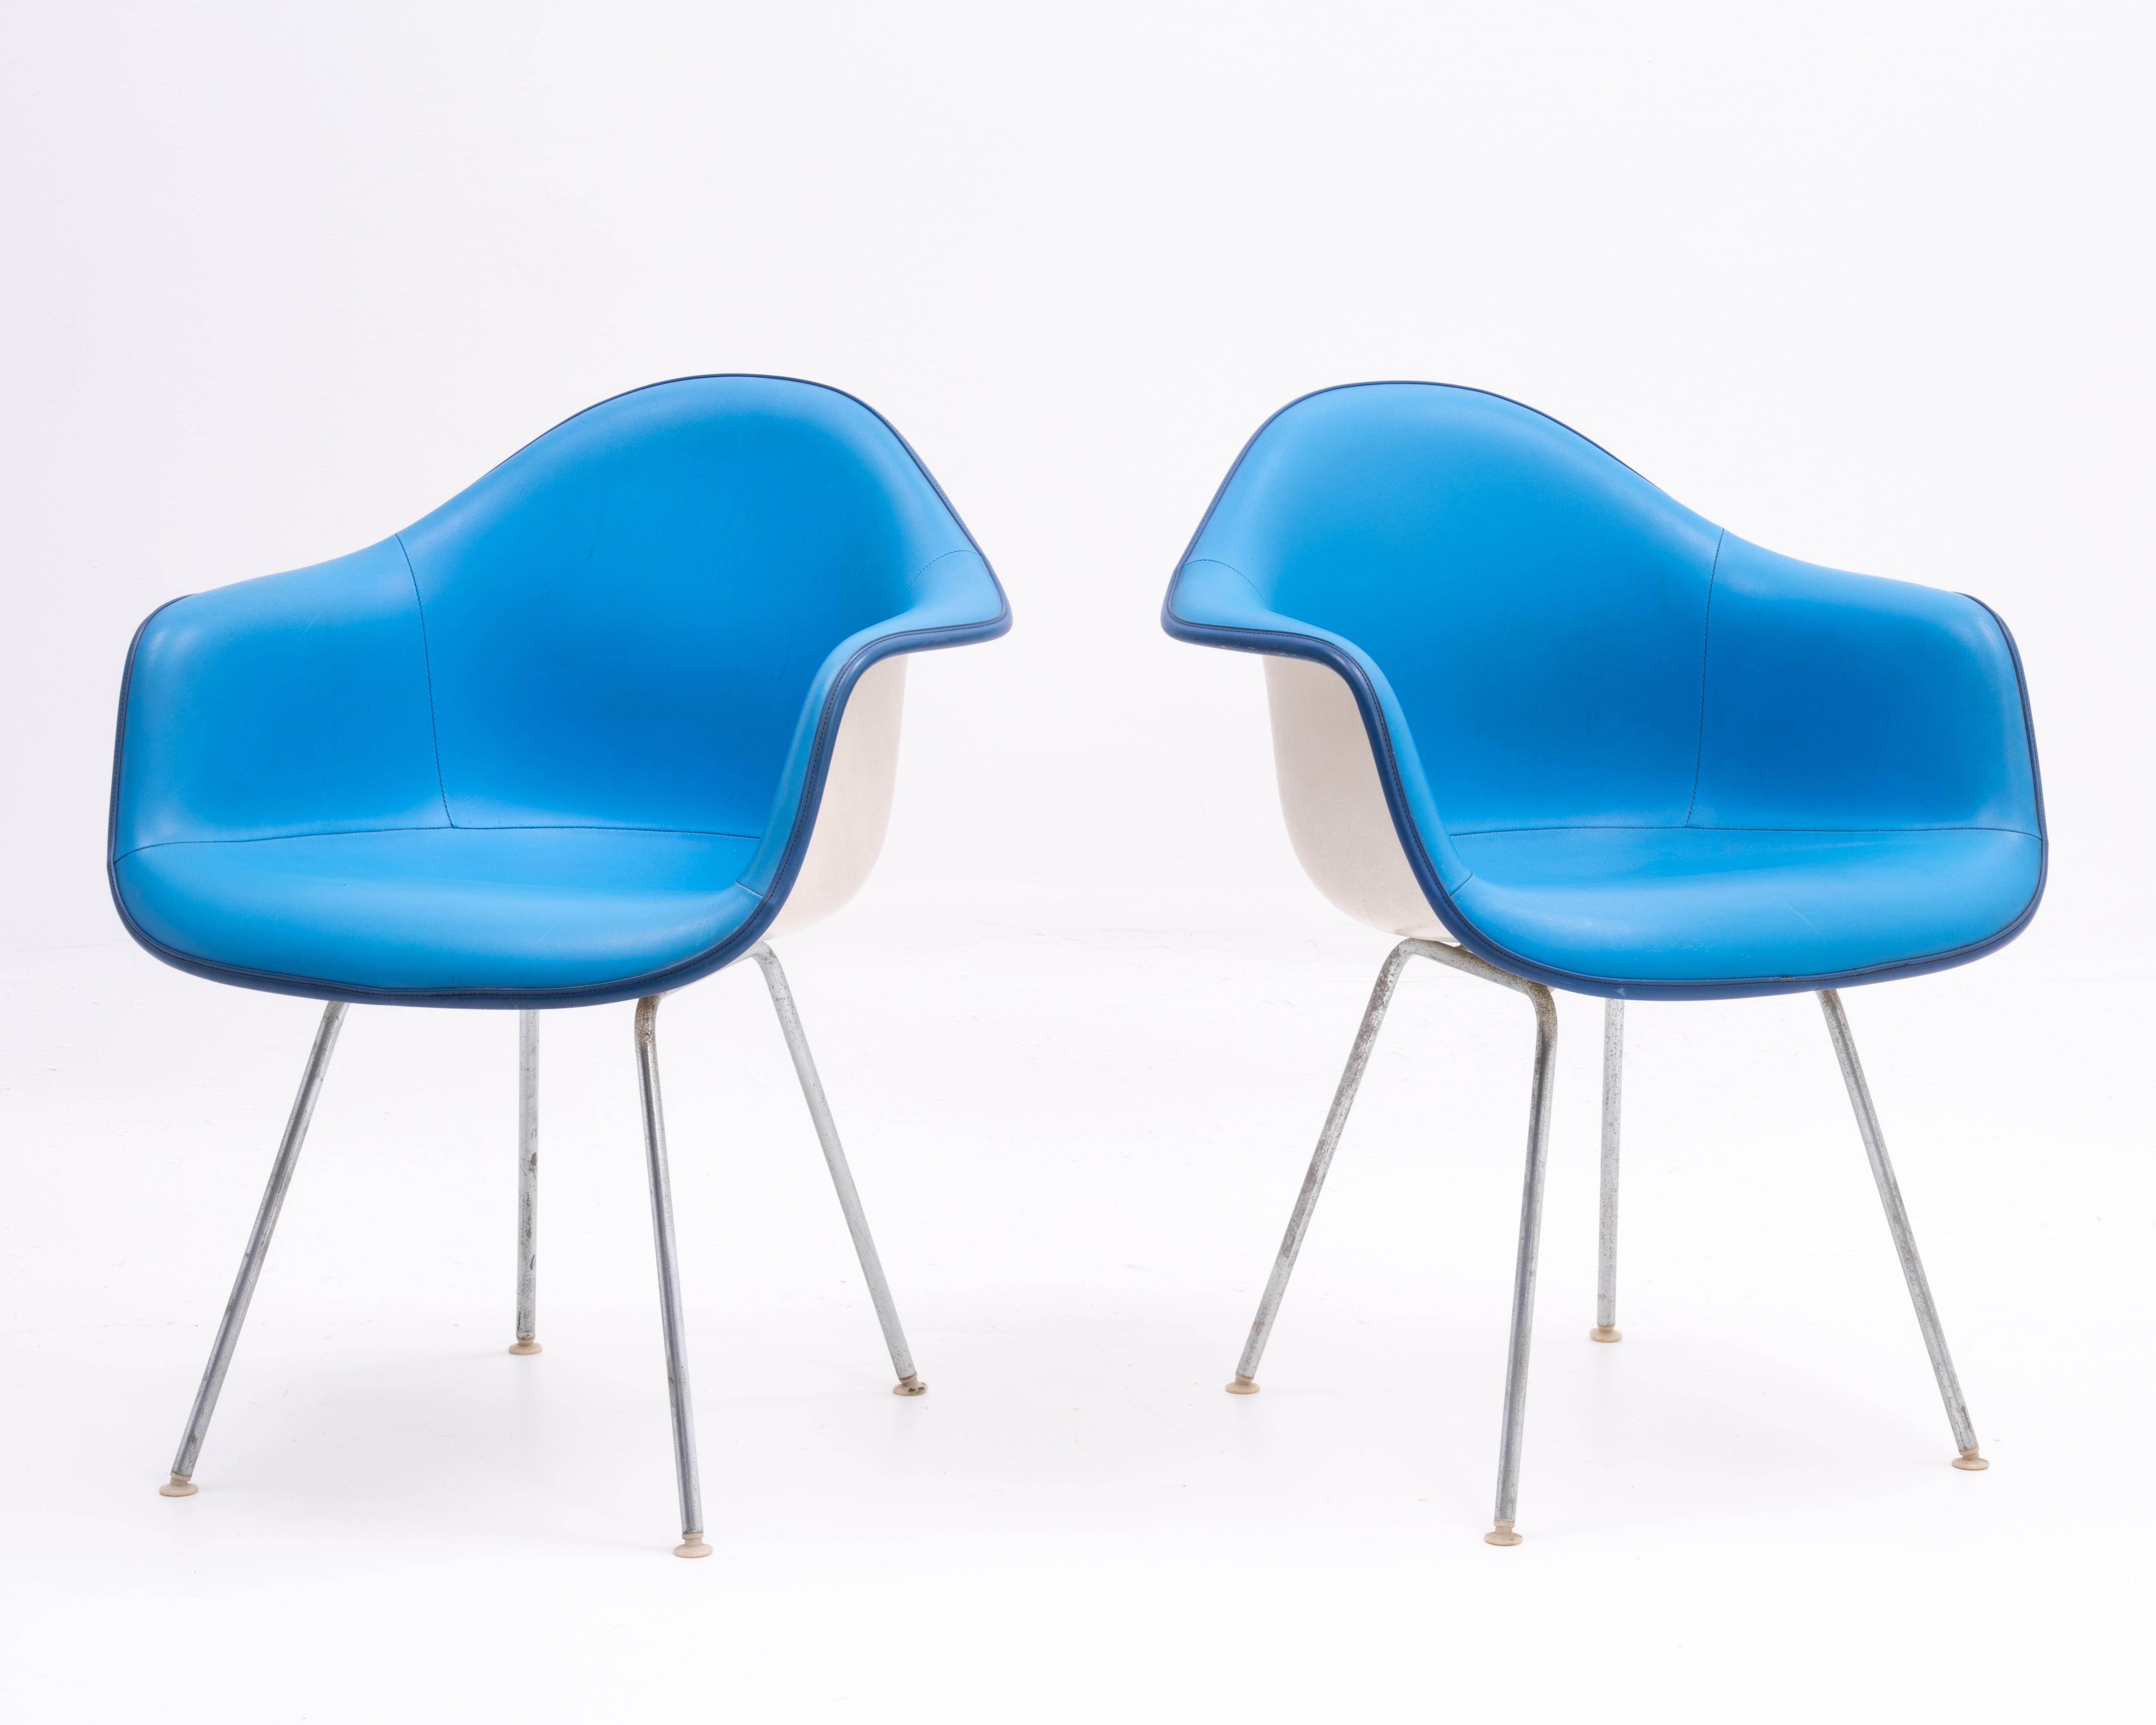 American Ray Charles Eames Herman Miller Padded Arm Shell Chairs Alexander Girard a Pair For Sale